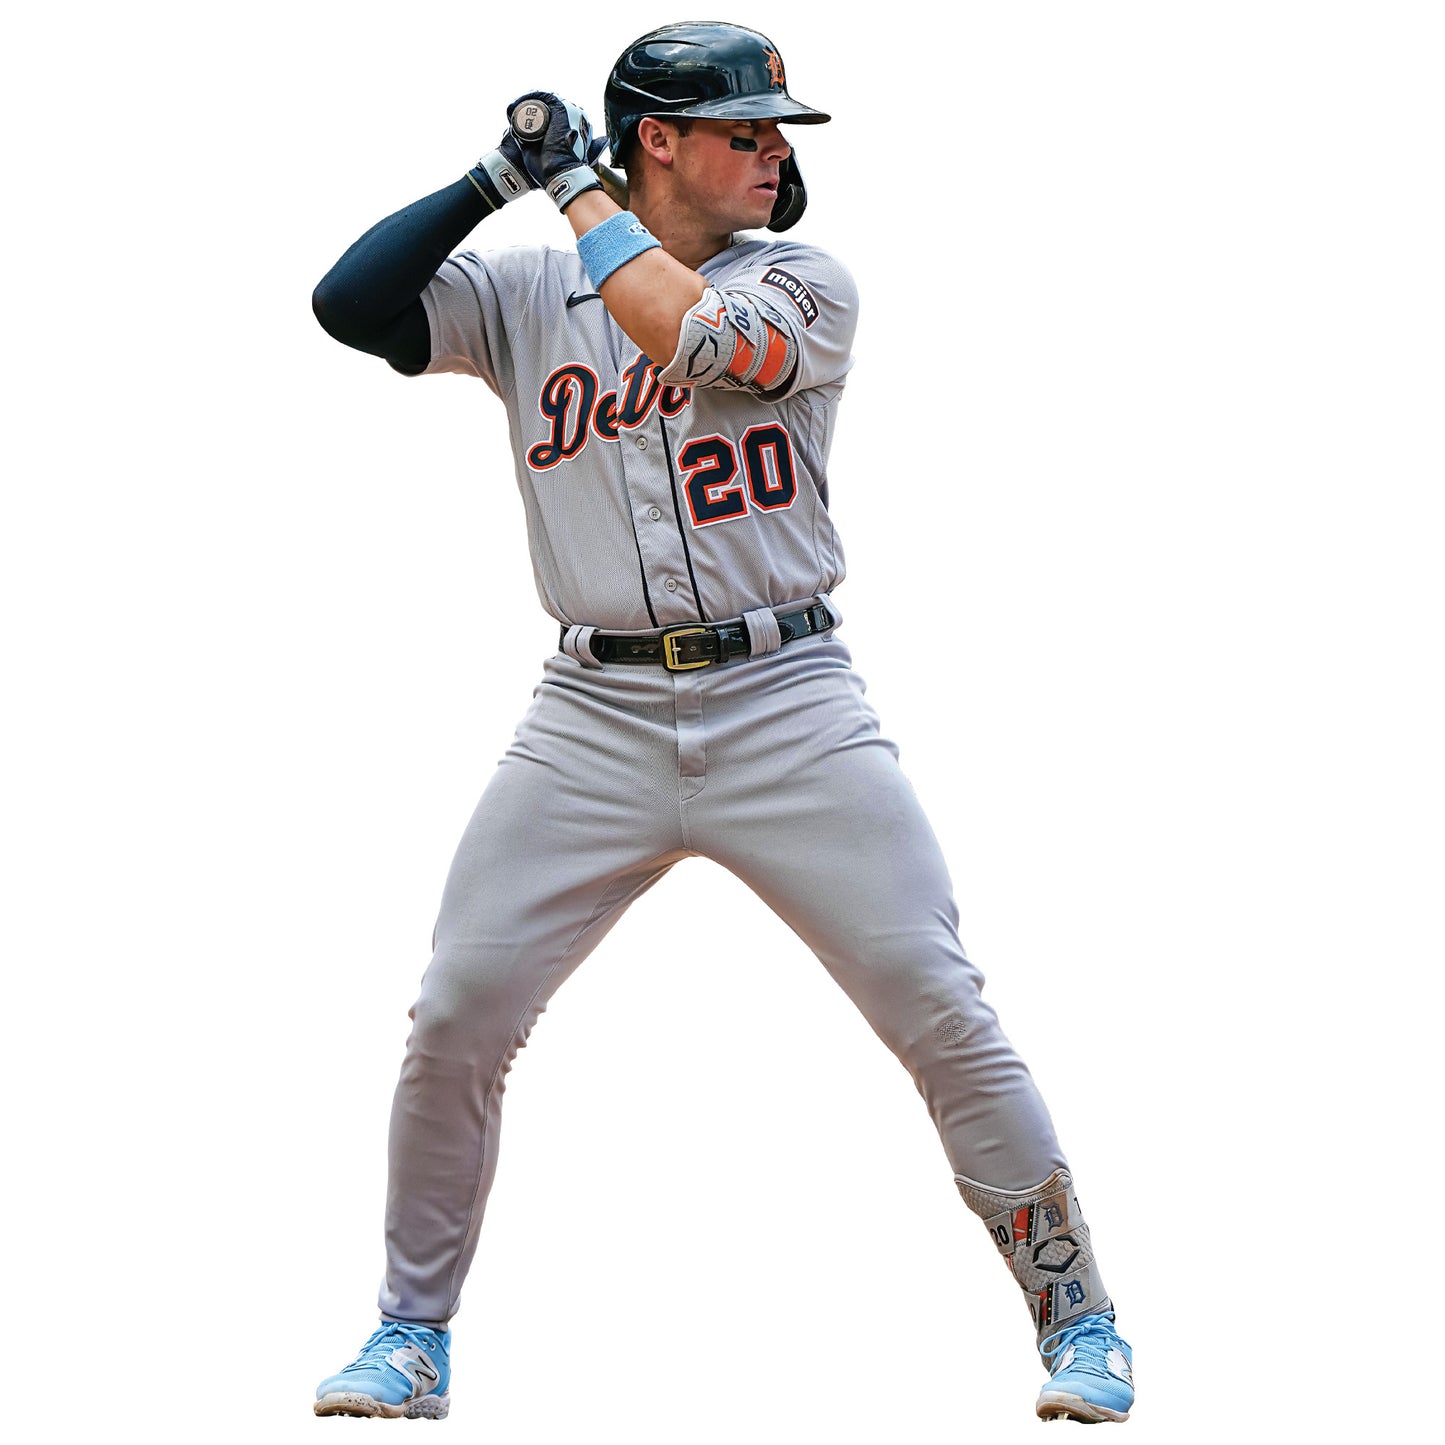 Detroit Tigers: Spencer Torkelson 2022 - Officially Licensed MLB Remov –  Fathead